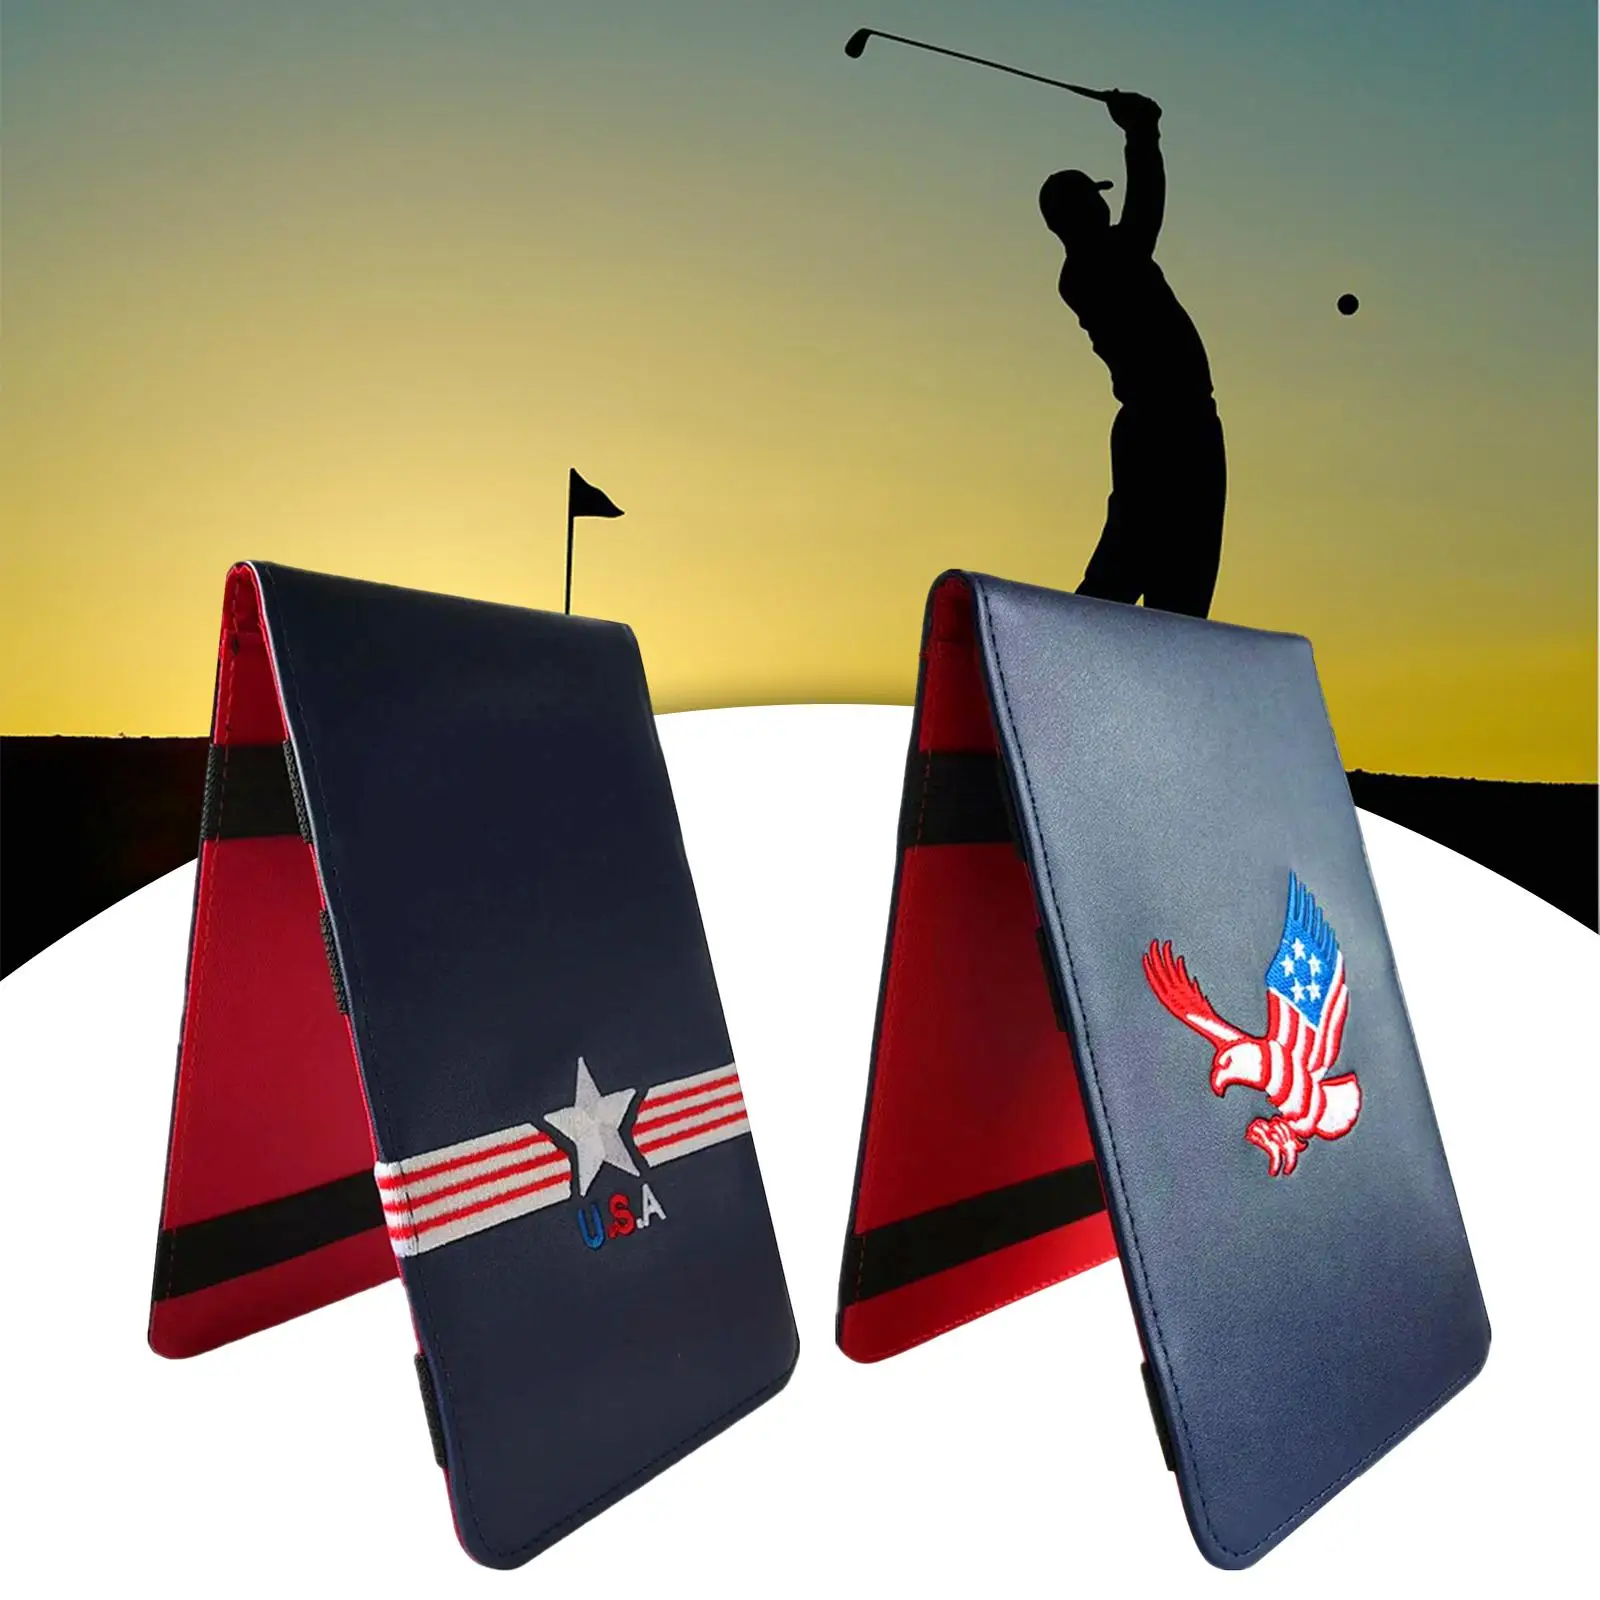 Golf Performance Scorecard Holder Embroidered Quality PU Leather Portable